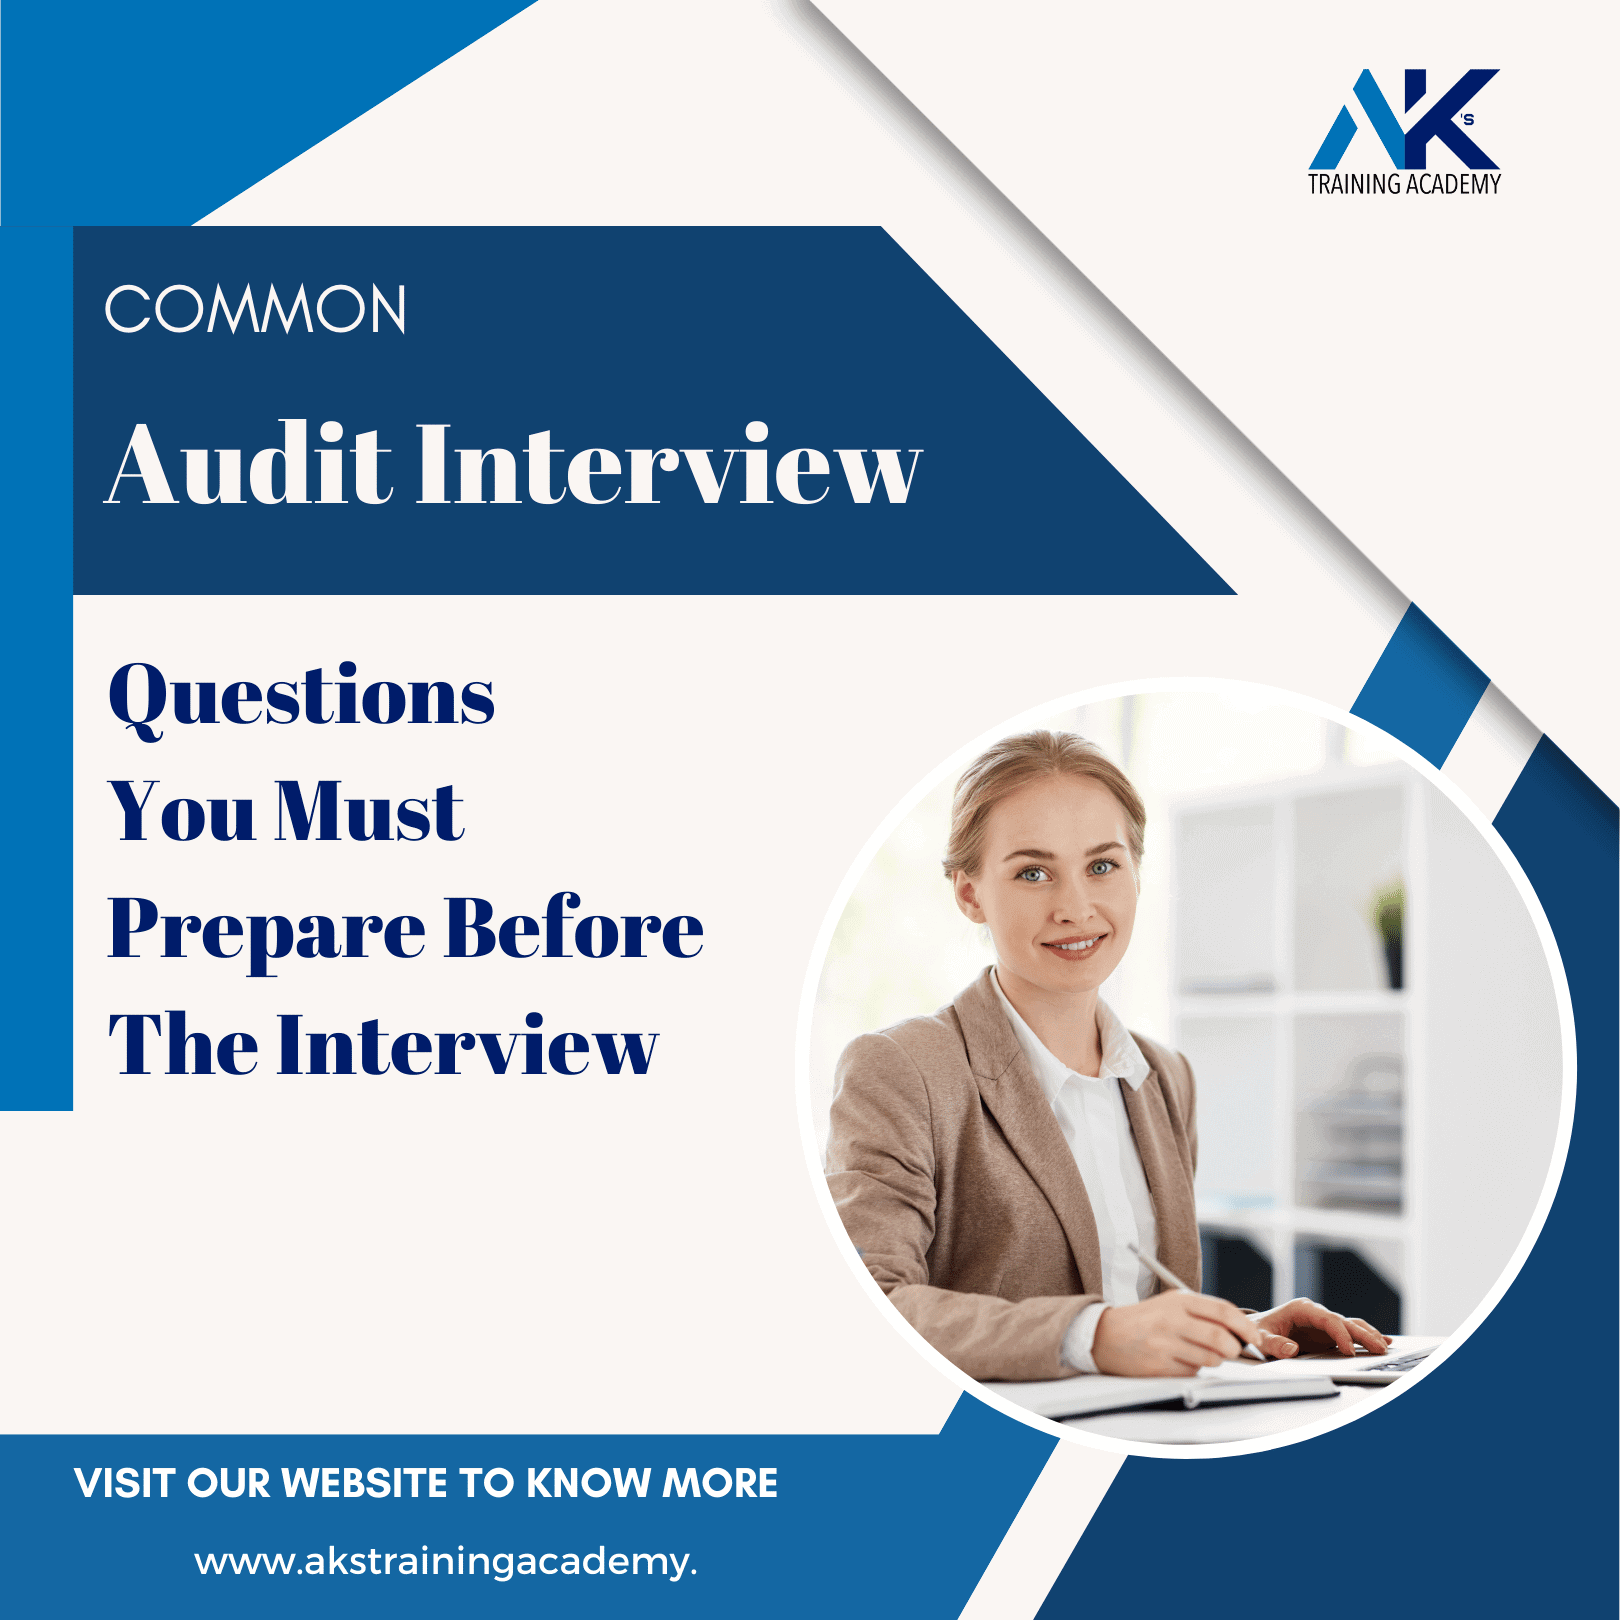 Audit Interview Questions You Must Prepare Before the interview.